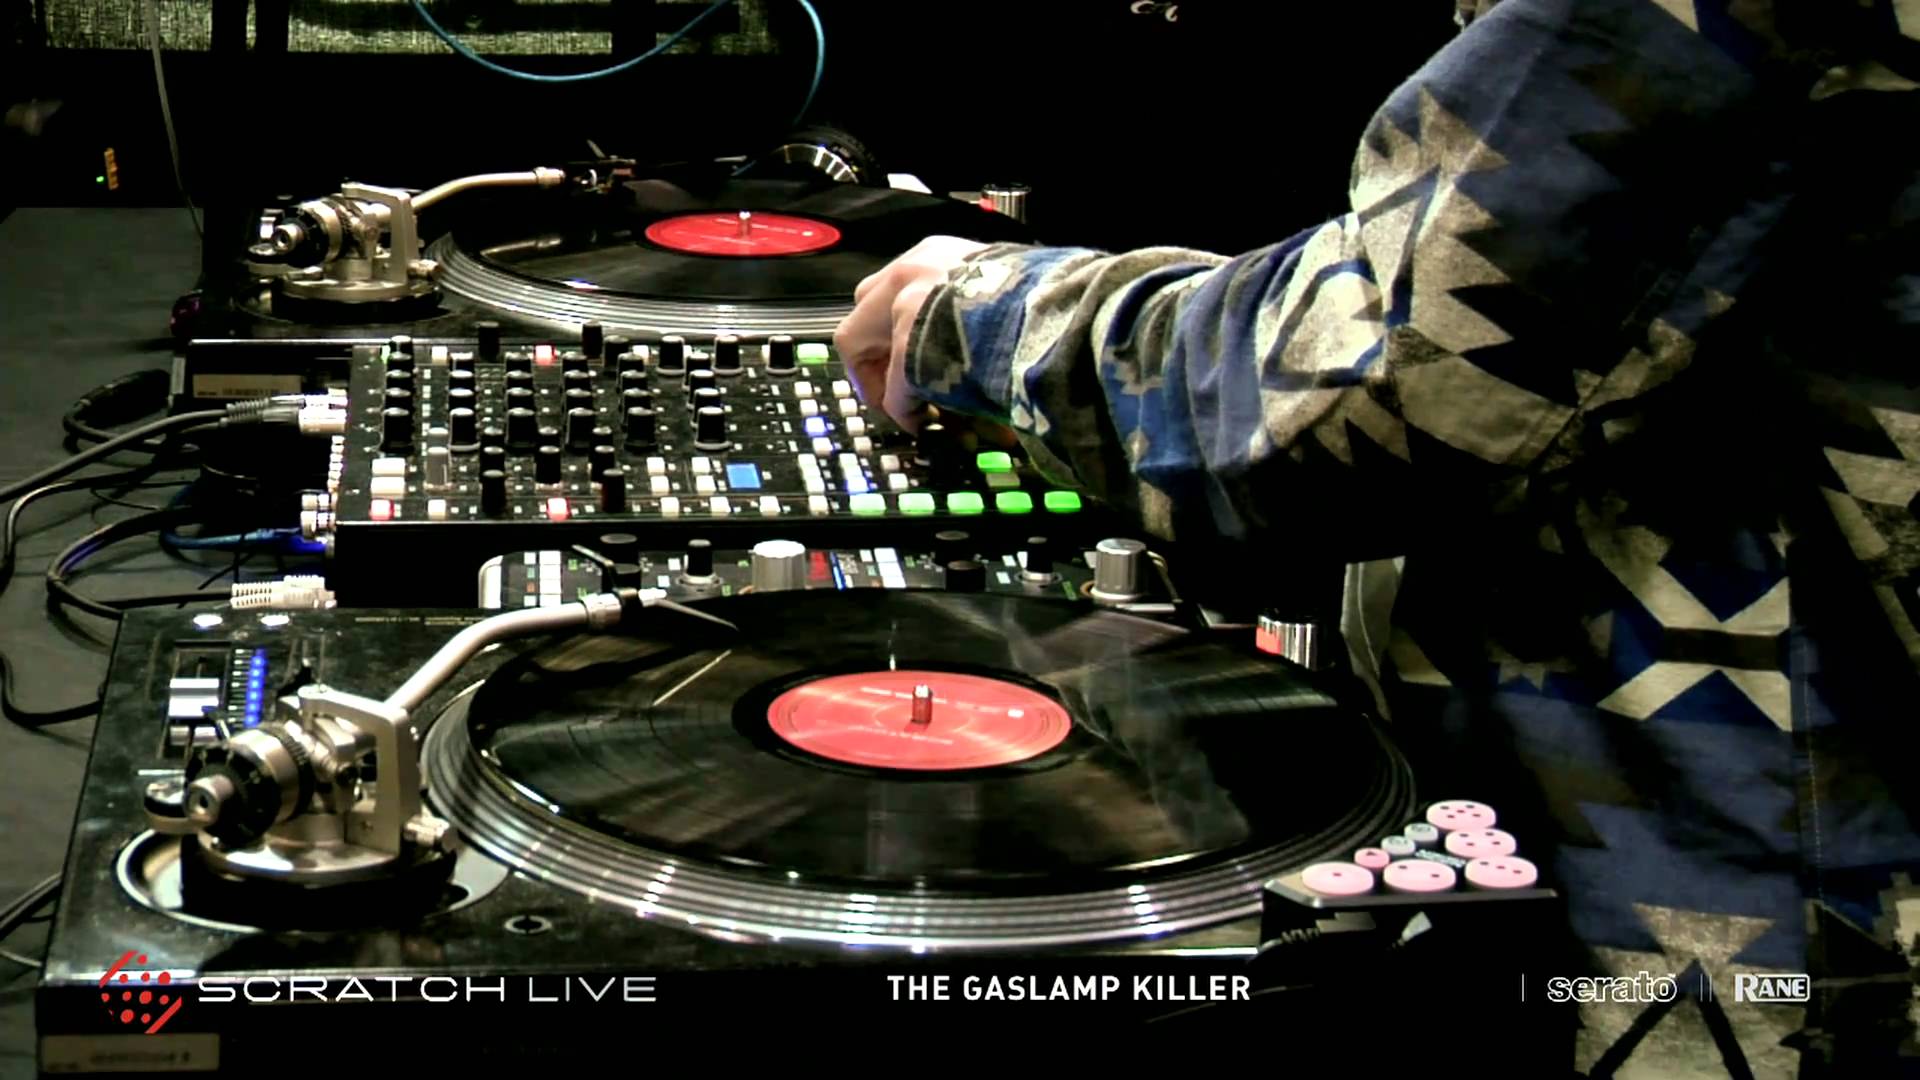 Serato Scratch Live at NAMM Show 2011 - YouTube